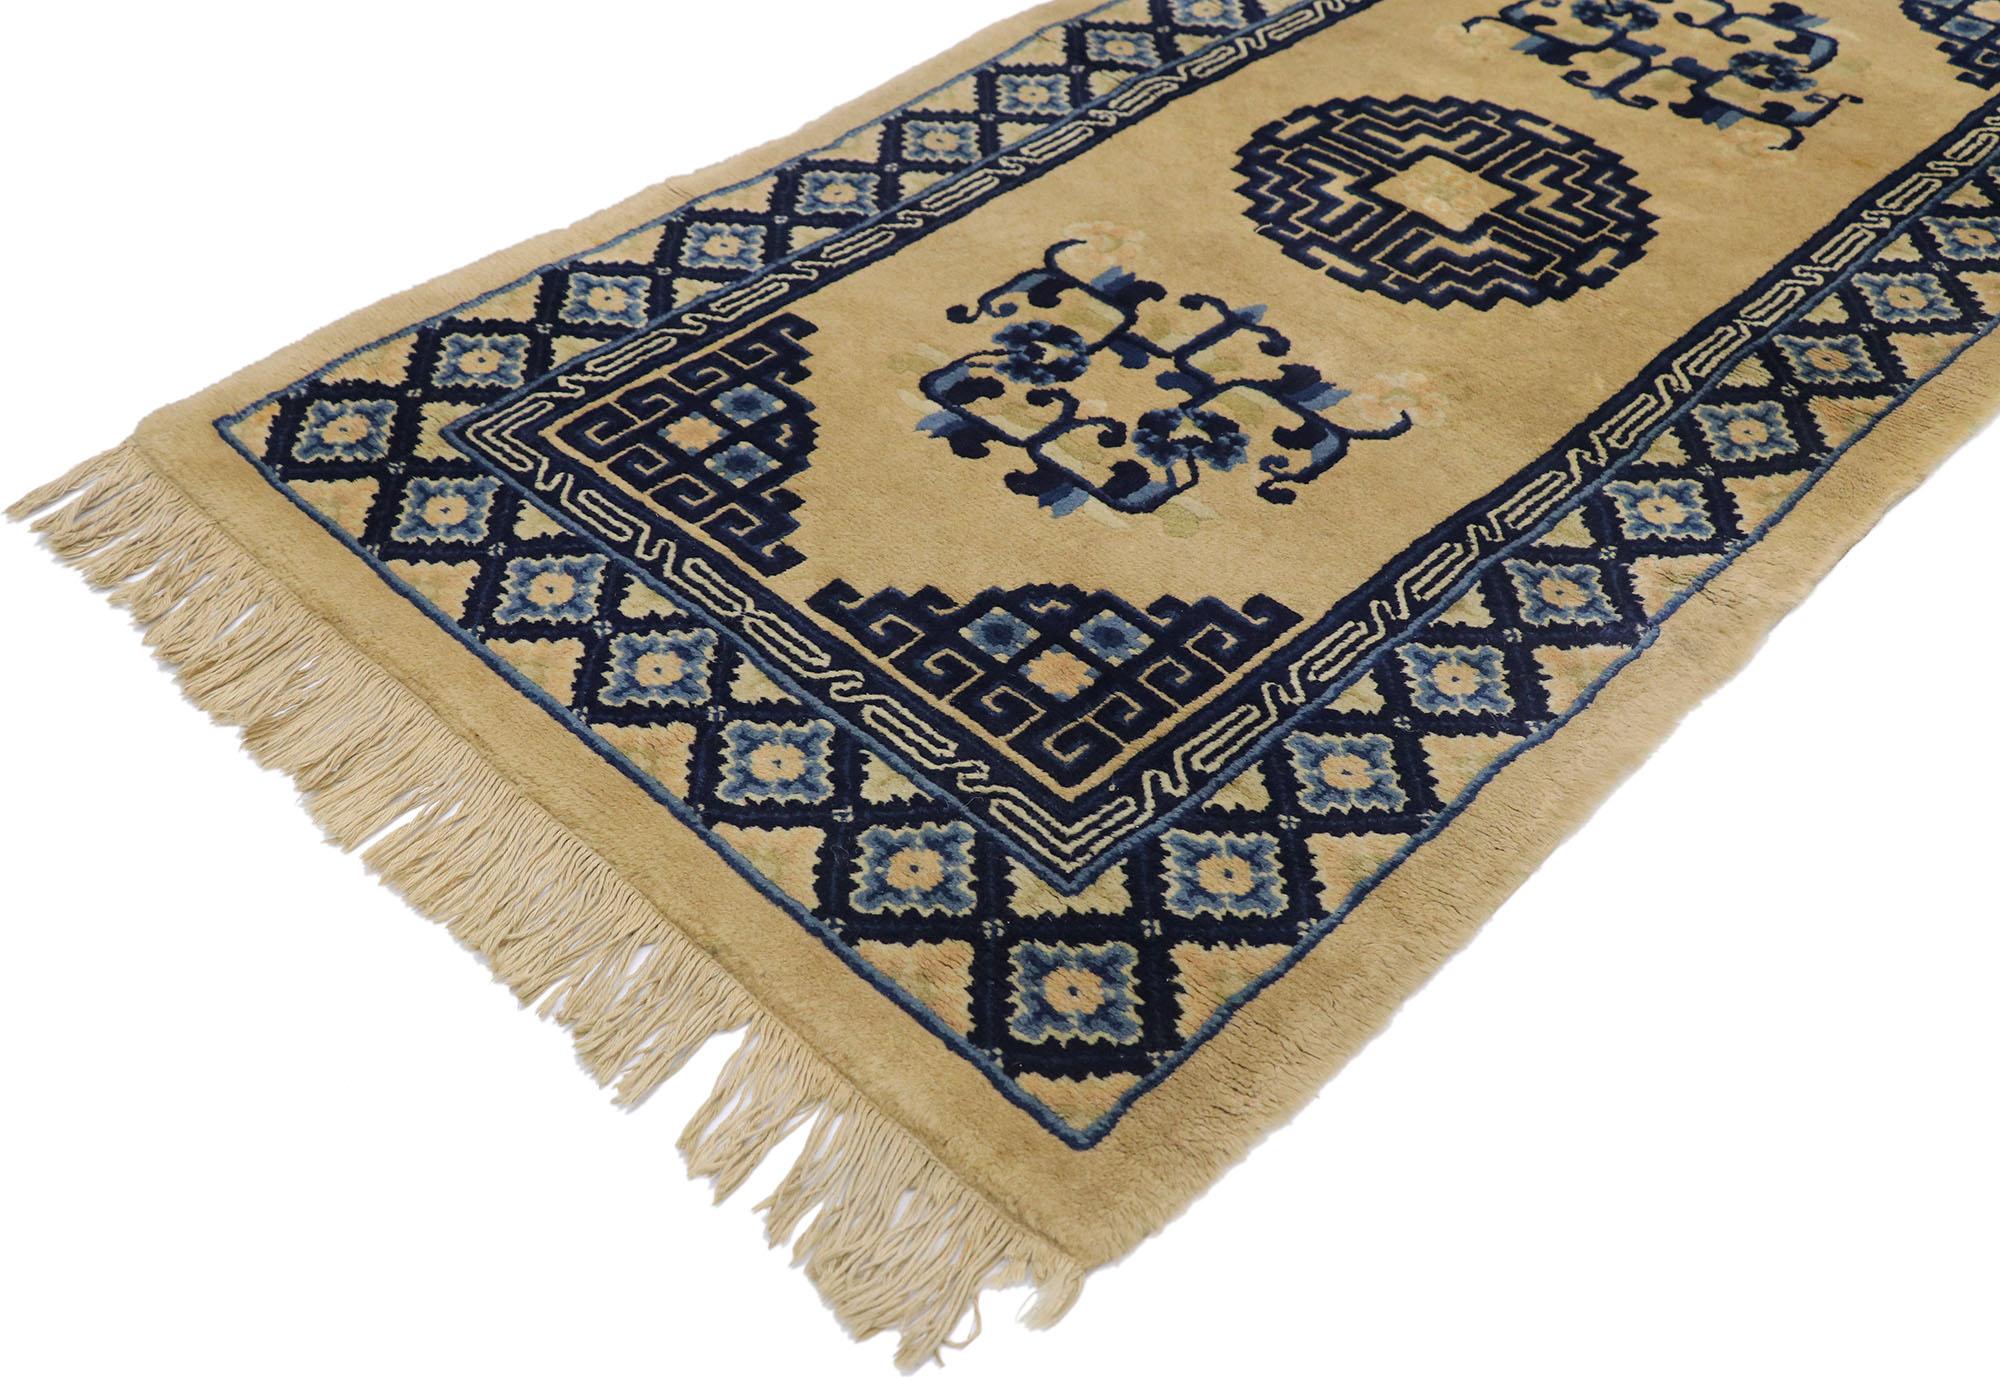 77588 antique Chinese Baotou rug with Art Deco style. This hand-knotted wool antique Chinese Baotou rug features a rounded fretwork medallion enclosing a center rosette floating in the center of an abrashed taupe field. Corresponding fretwork